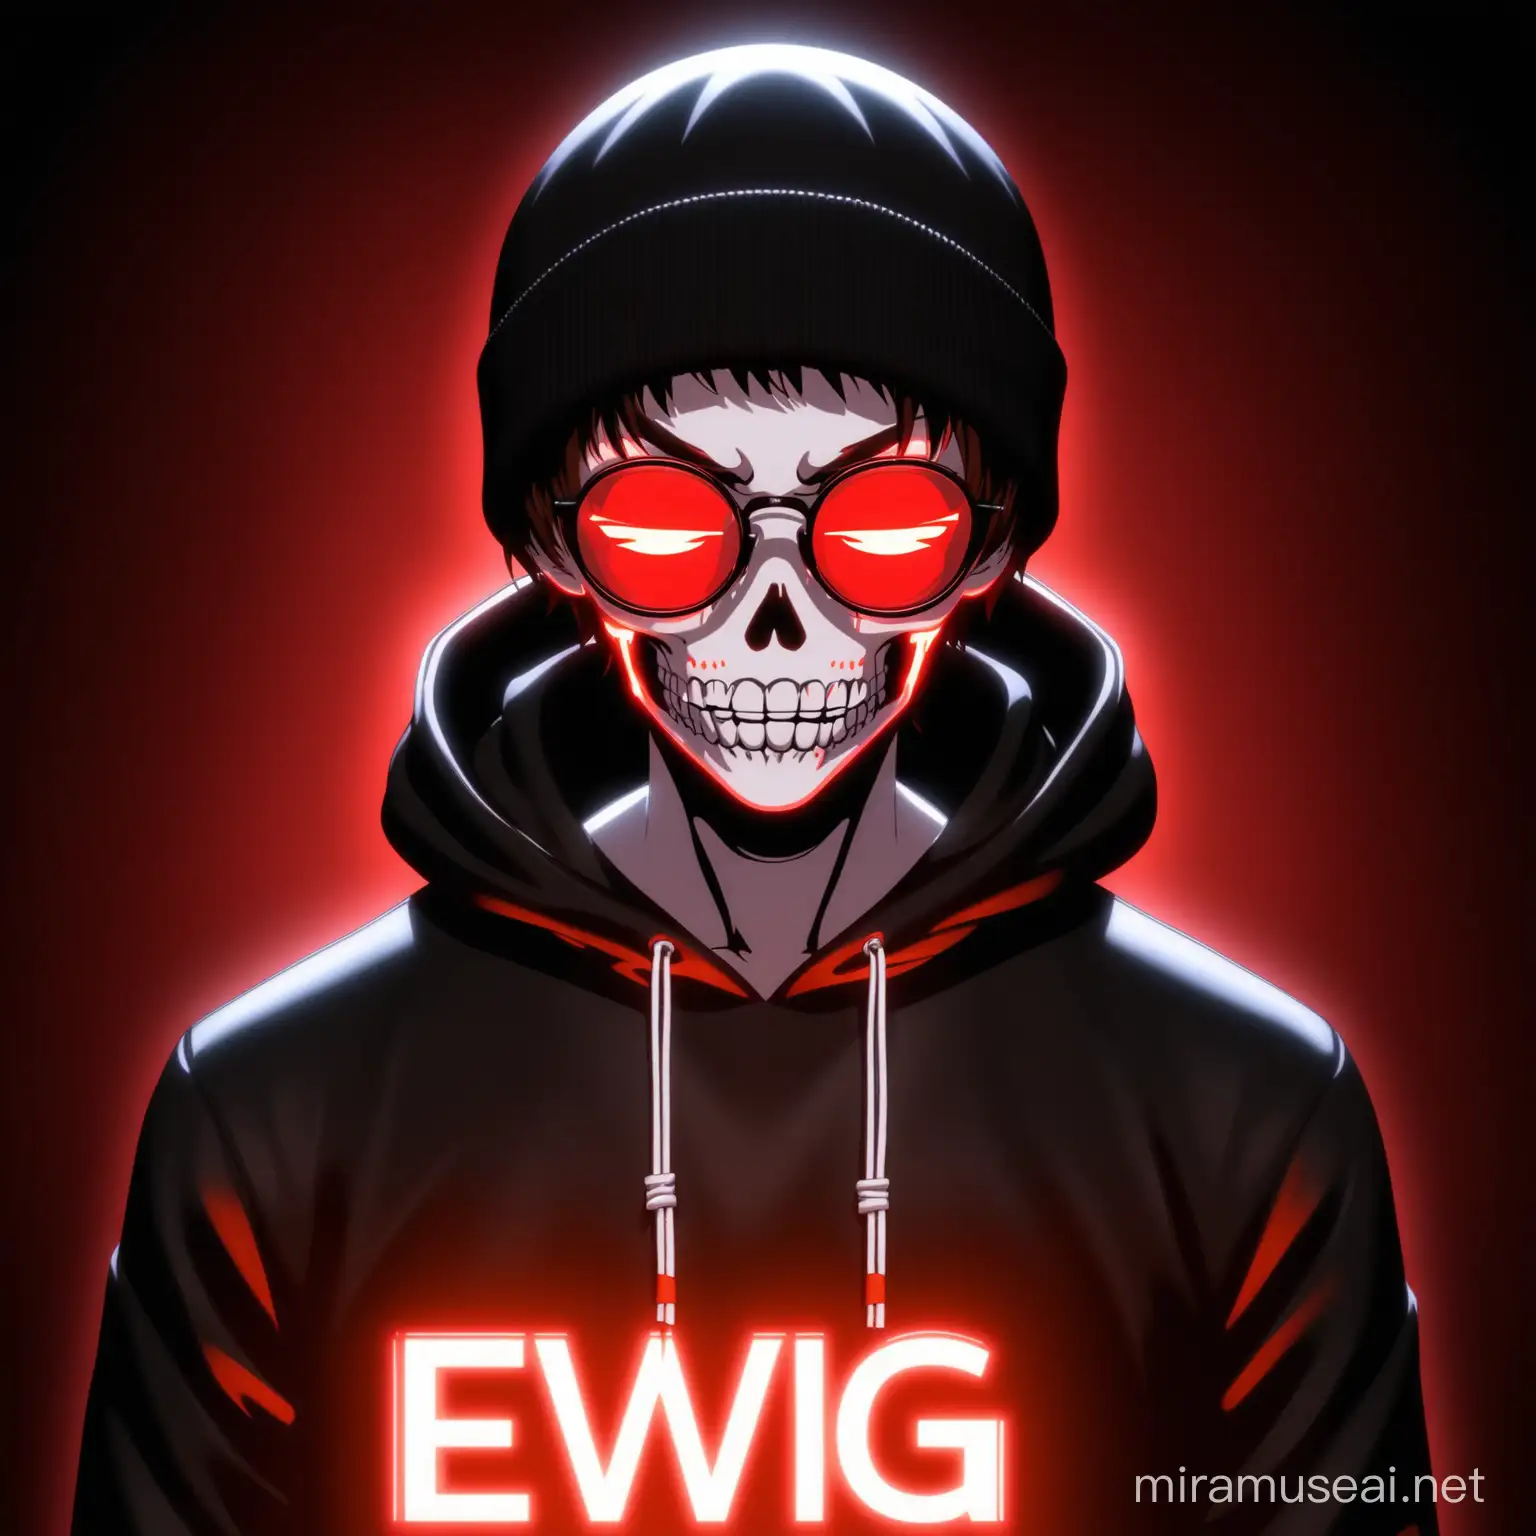 anime brown boy, skeleton face paint makeup, short black hair, red glowing eyes, black reading glasses, wearing black beanie hat, wearing white shirt, wearing black leather hoodie, black anime EWG text red glowing background, 3D anime style.